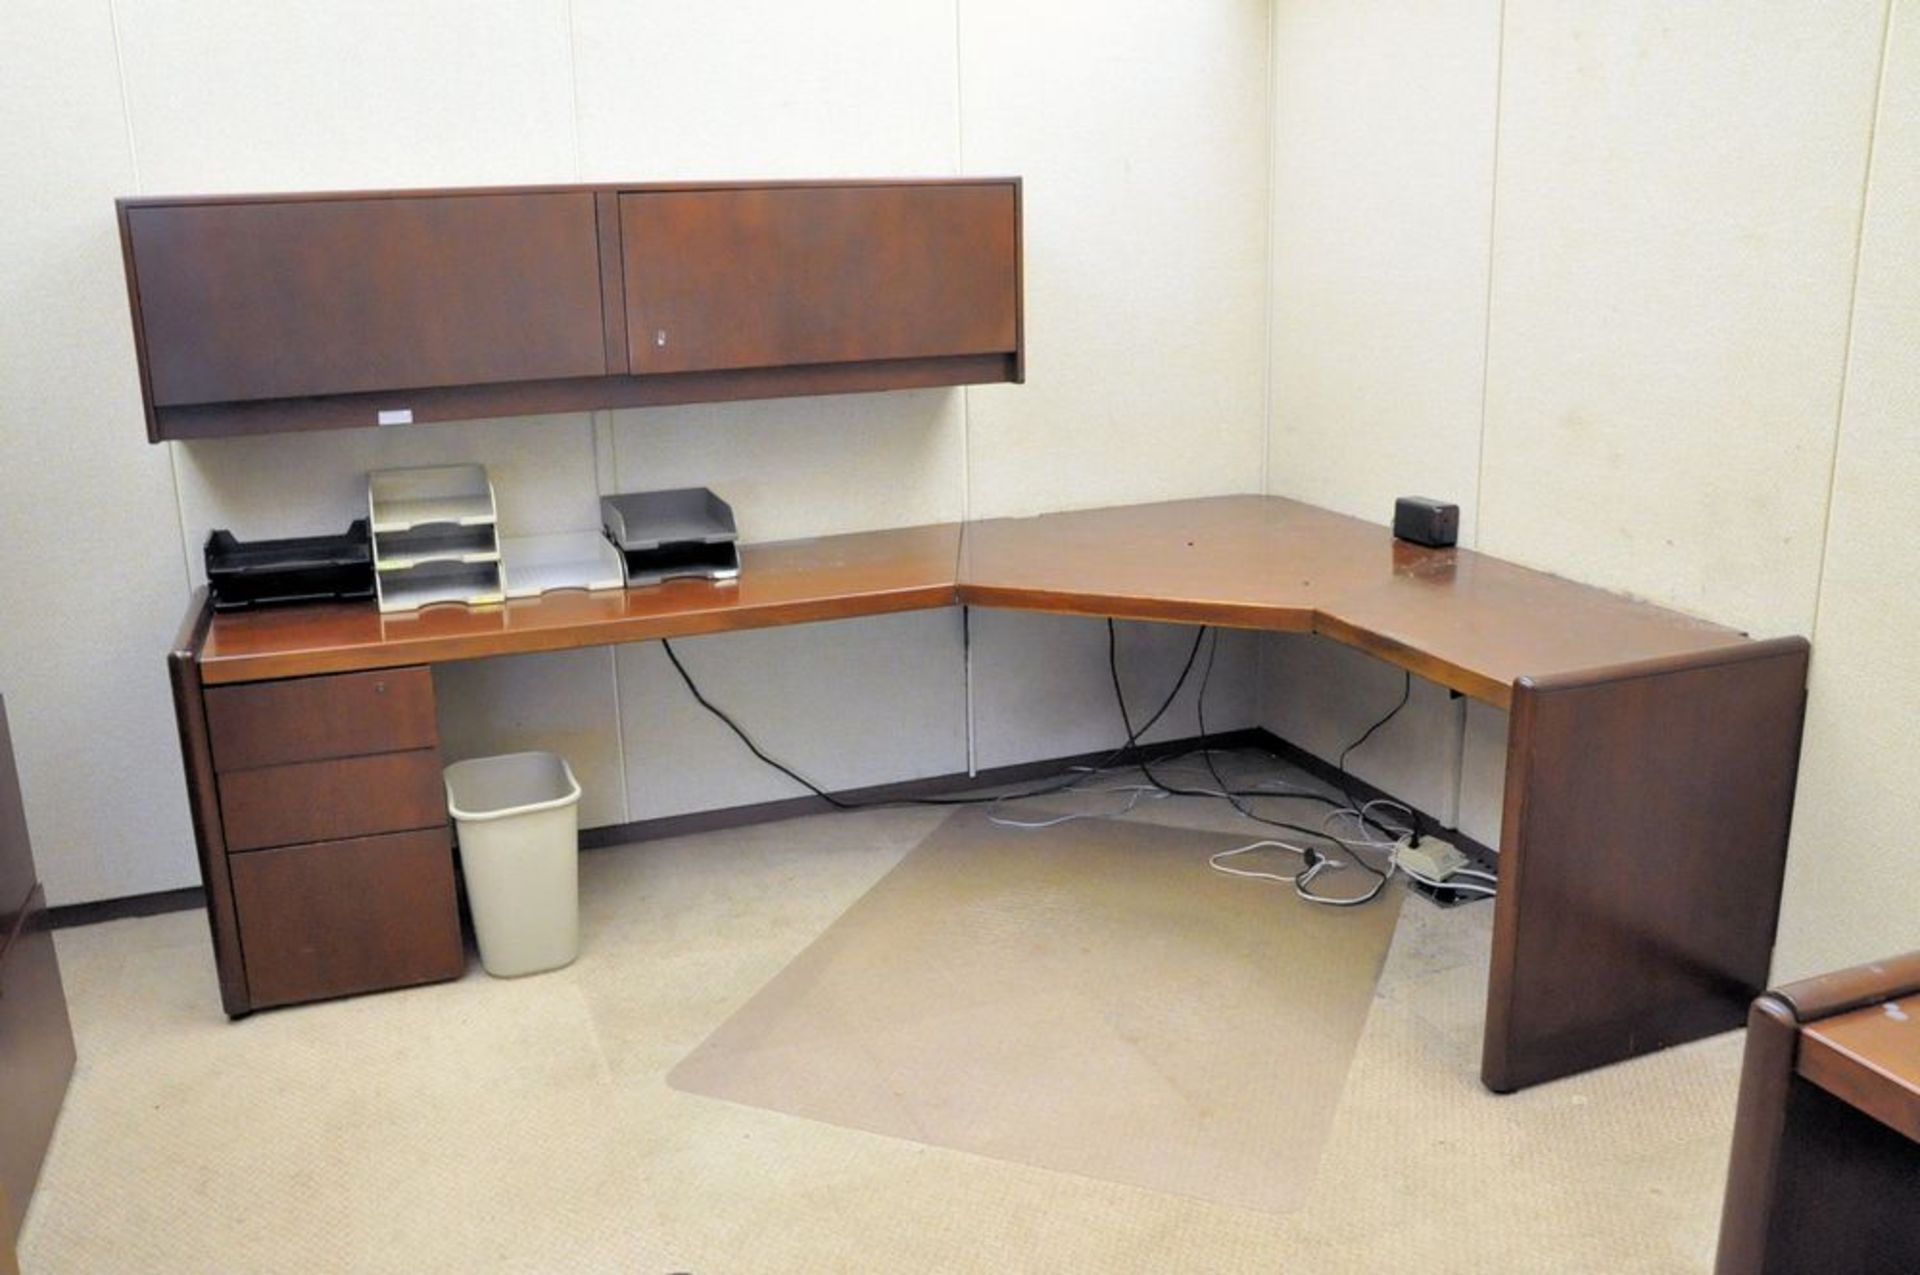 Lot-(1) Modular Partition Desk System with (1) Desk, (3) Lateral File Cabinets, and (1) Overhead